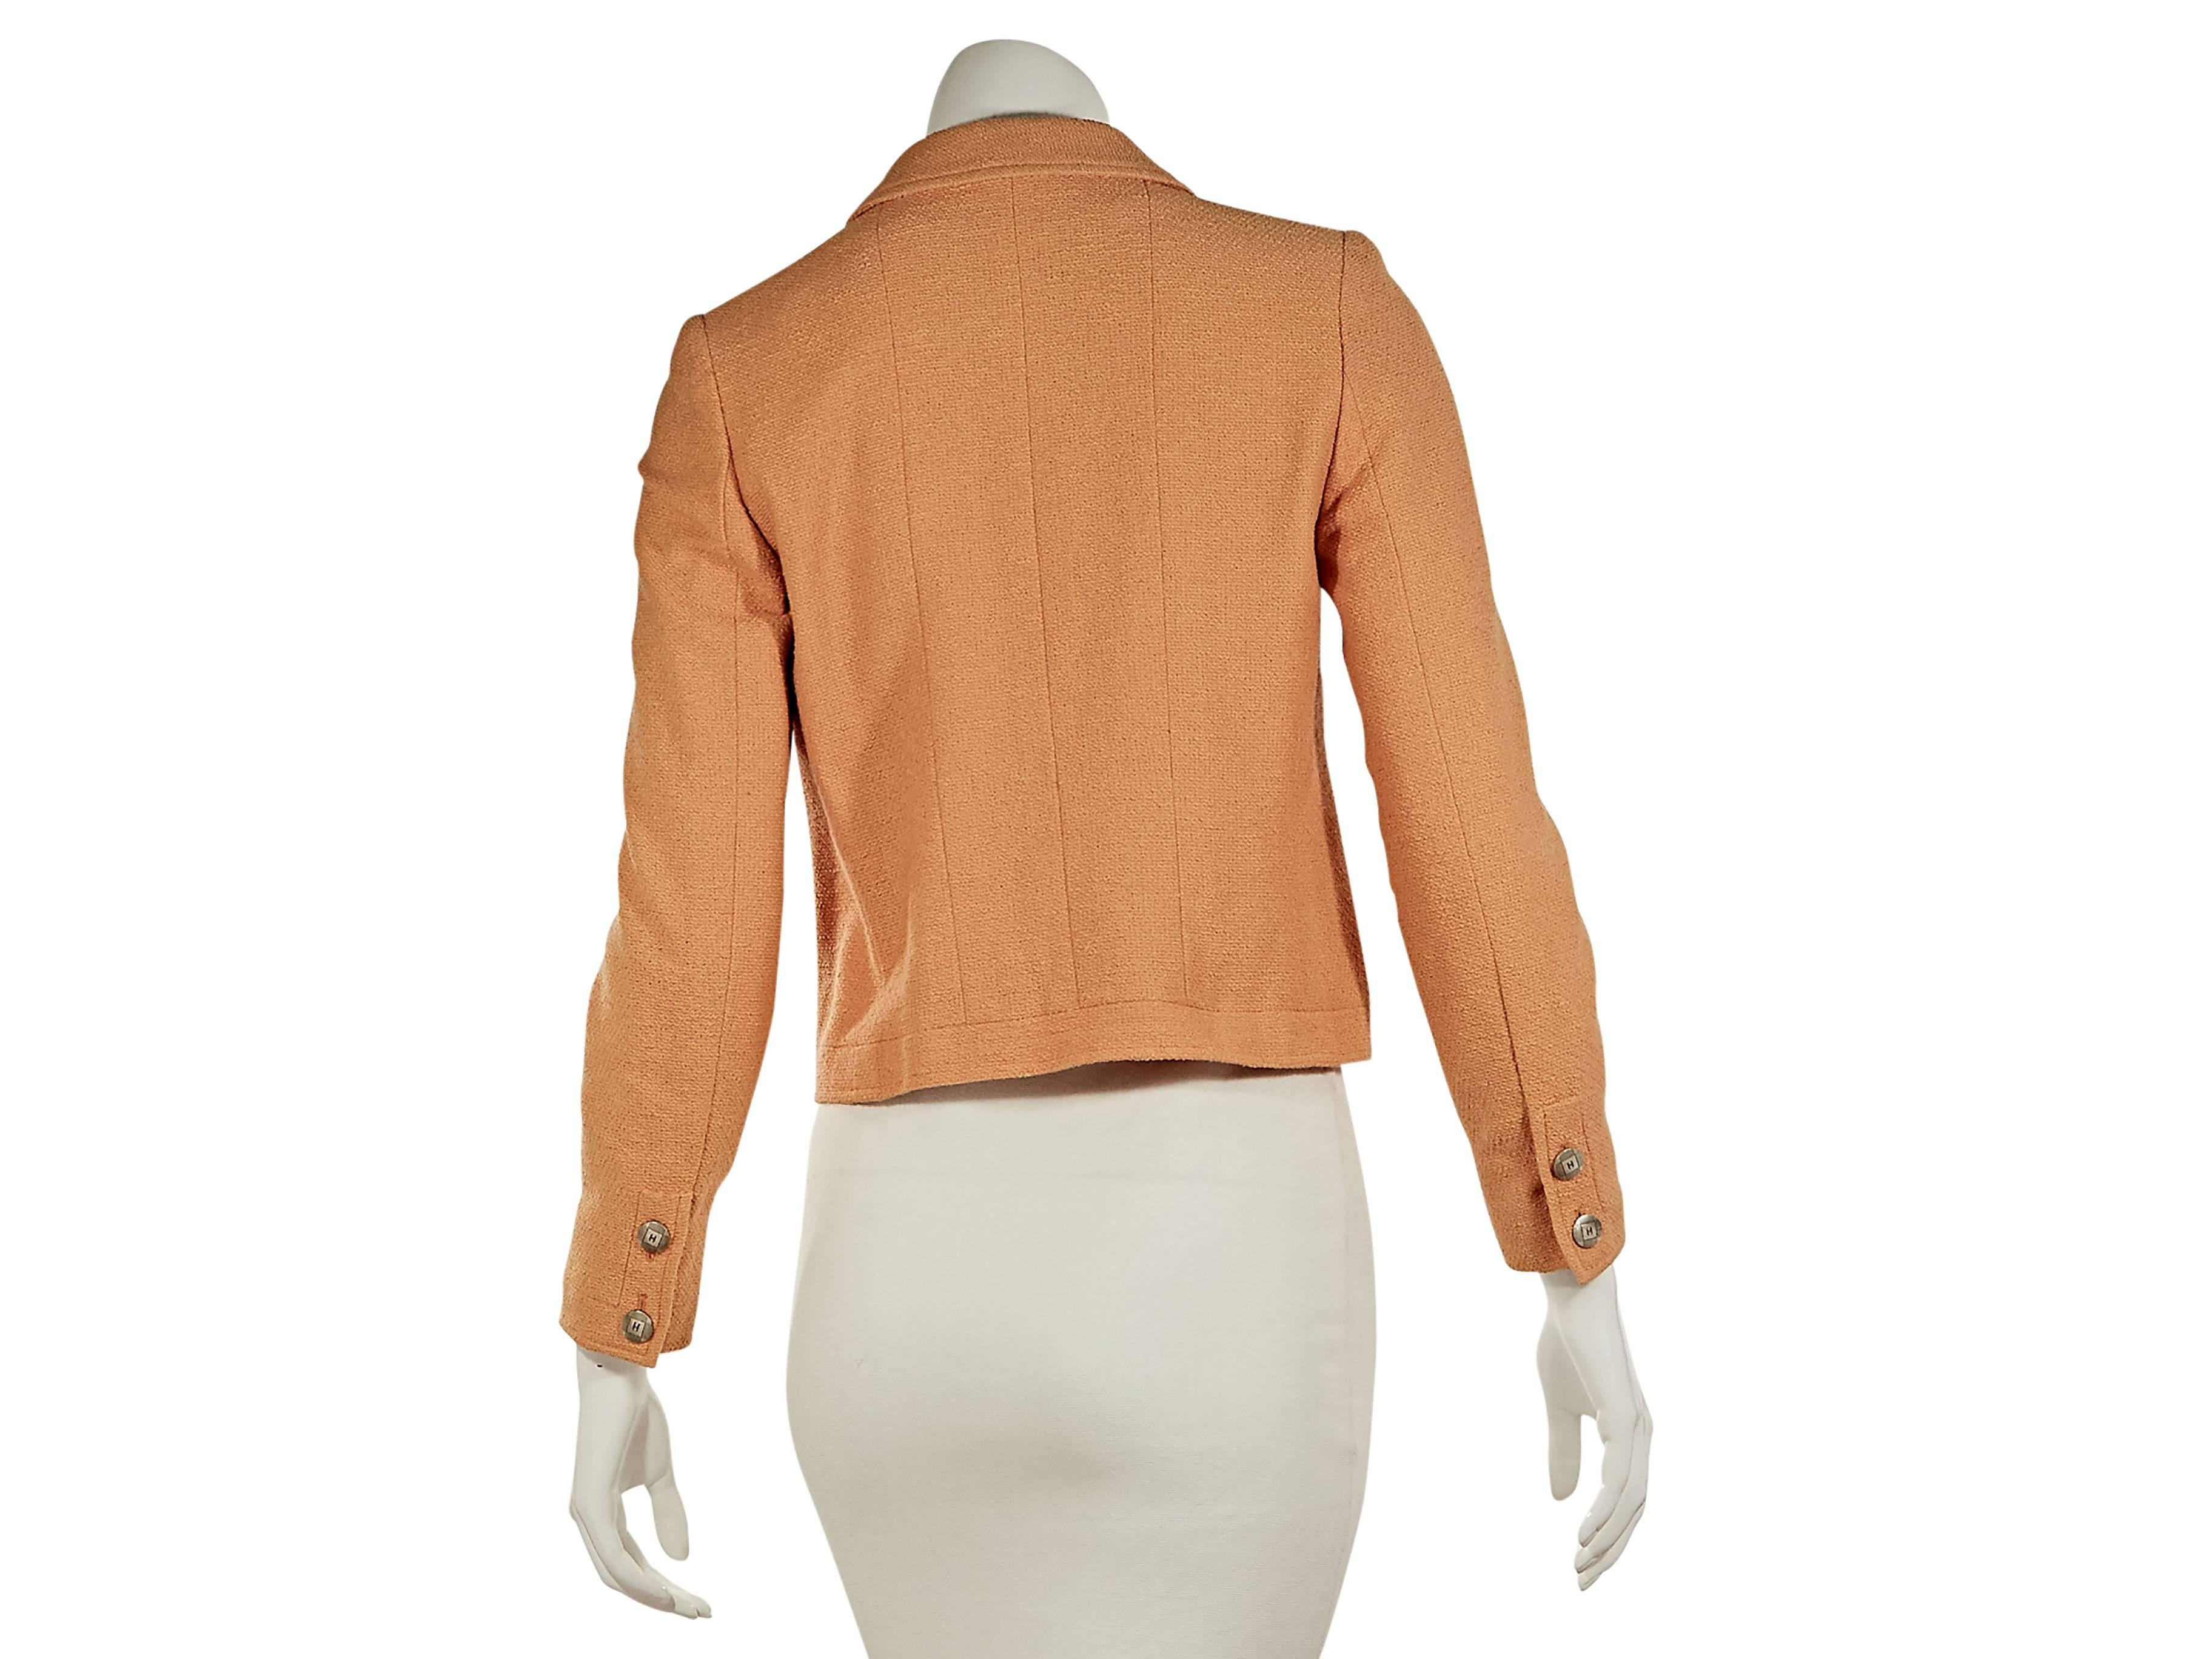   Peach textured cotton jacket by Chanel.  Spread collar.  Bracelet-length sleeves.  Double button cuffs.  Button-front closure.  Button patch pockets. 